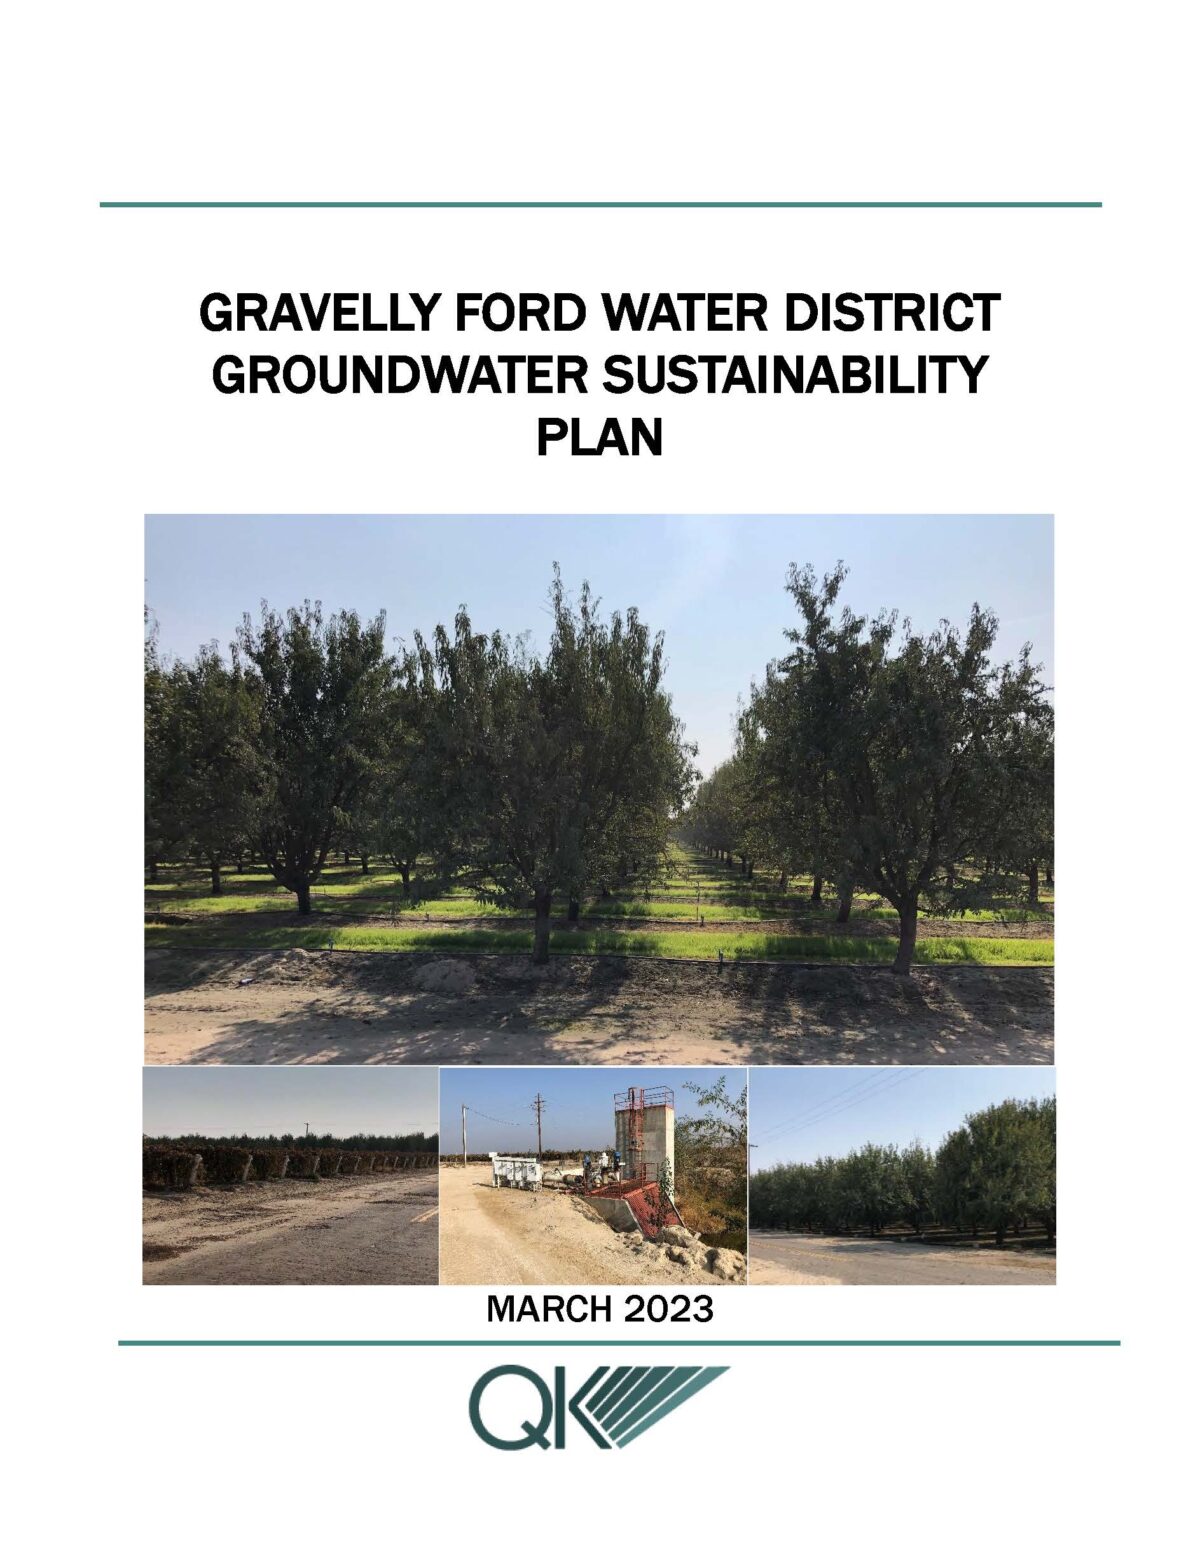 Gravelly Ford Water District Groundwater Sustainability Plan